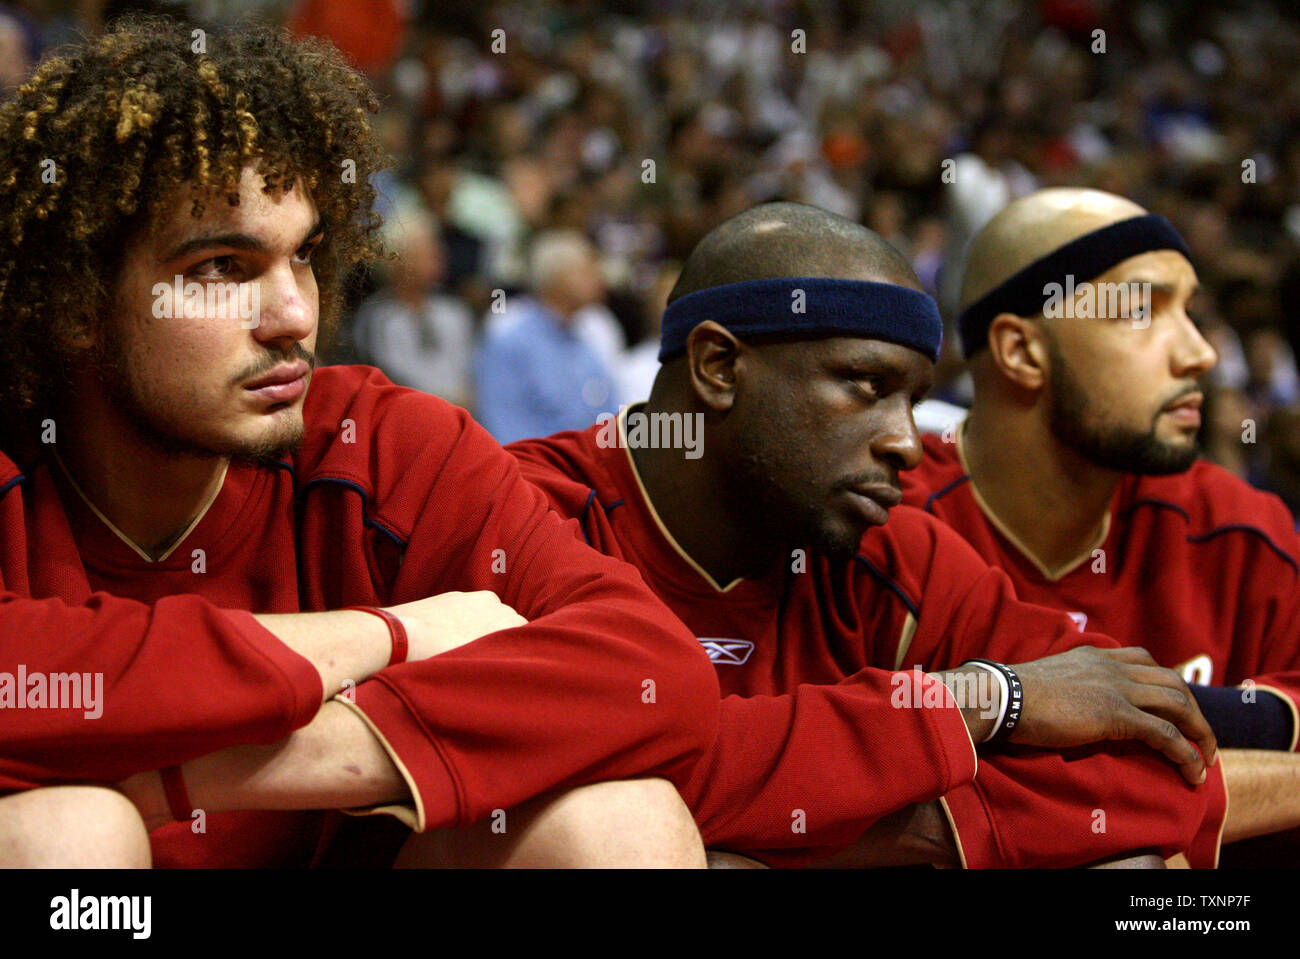 Cleveland Cavaliers Anderson Varejao, left, Ronald Murray, center, and Drew Gooden watch the game against the Detroit Pistons in the fourth quarter at The Palace of Auburn Hills in Auburn Hills, Mi on May 21, 2006.  The Pistons defeated the Cavaliers 79-61 to win game seven of the second round of playoffs.  The Pistons will face the Miami Heat in the third round.  (UPI Photo/Scott R. Galvin) Stock Photo